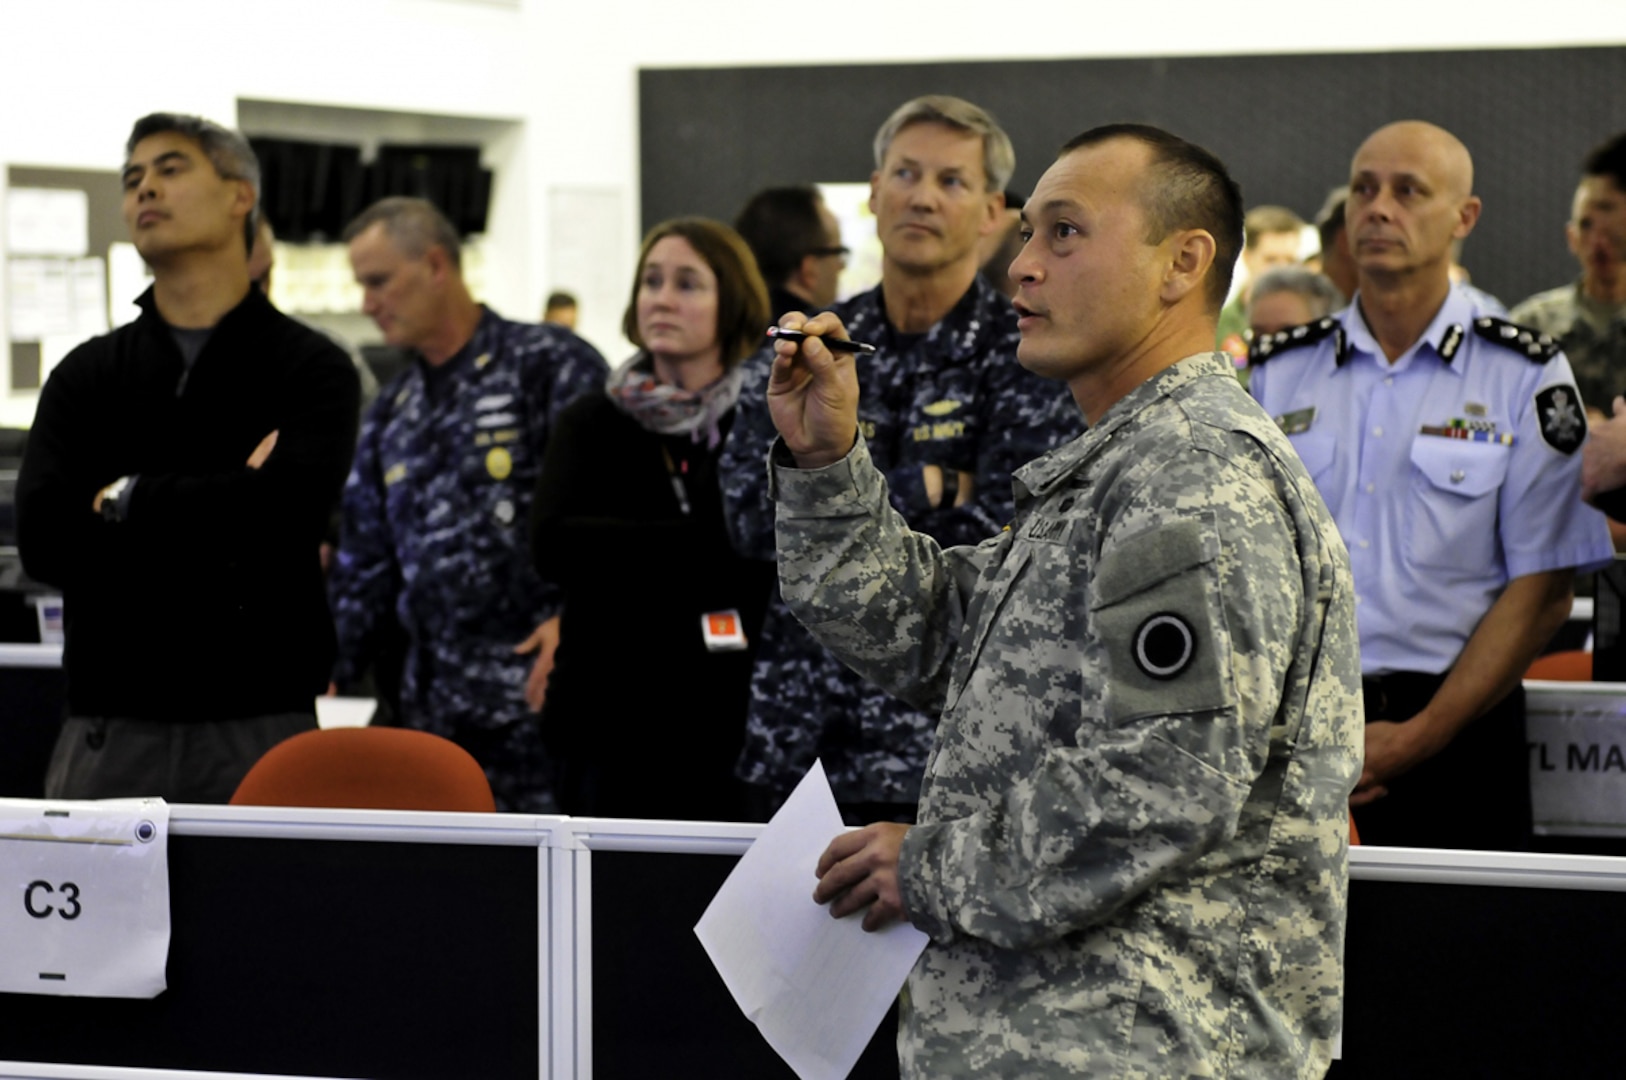 GALLIPOLI BARRACKS, Australia (July 17, 2015) - Maj. Siegfried Ramil, a battle major with I Corps, briefs Vice Adm. Robert Thomas, 7th Fleet commander, about the current operations I Corps is tracking for their command portion of Exercise Talisman Sabre 15 during a tour with other non-governmental agencies for an interagency observers day visit.   